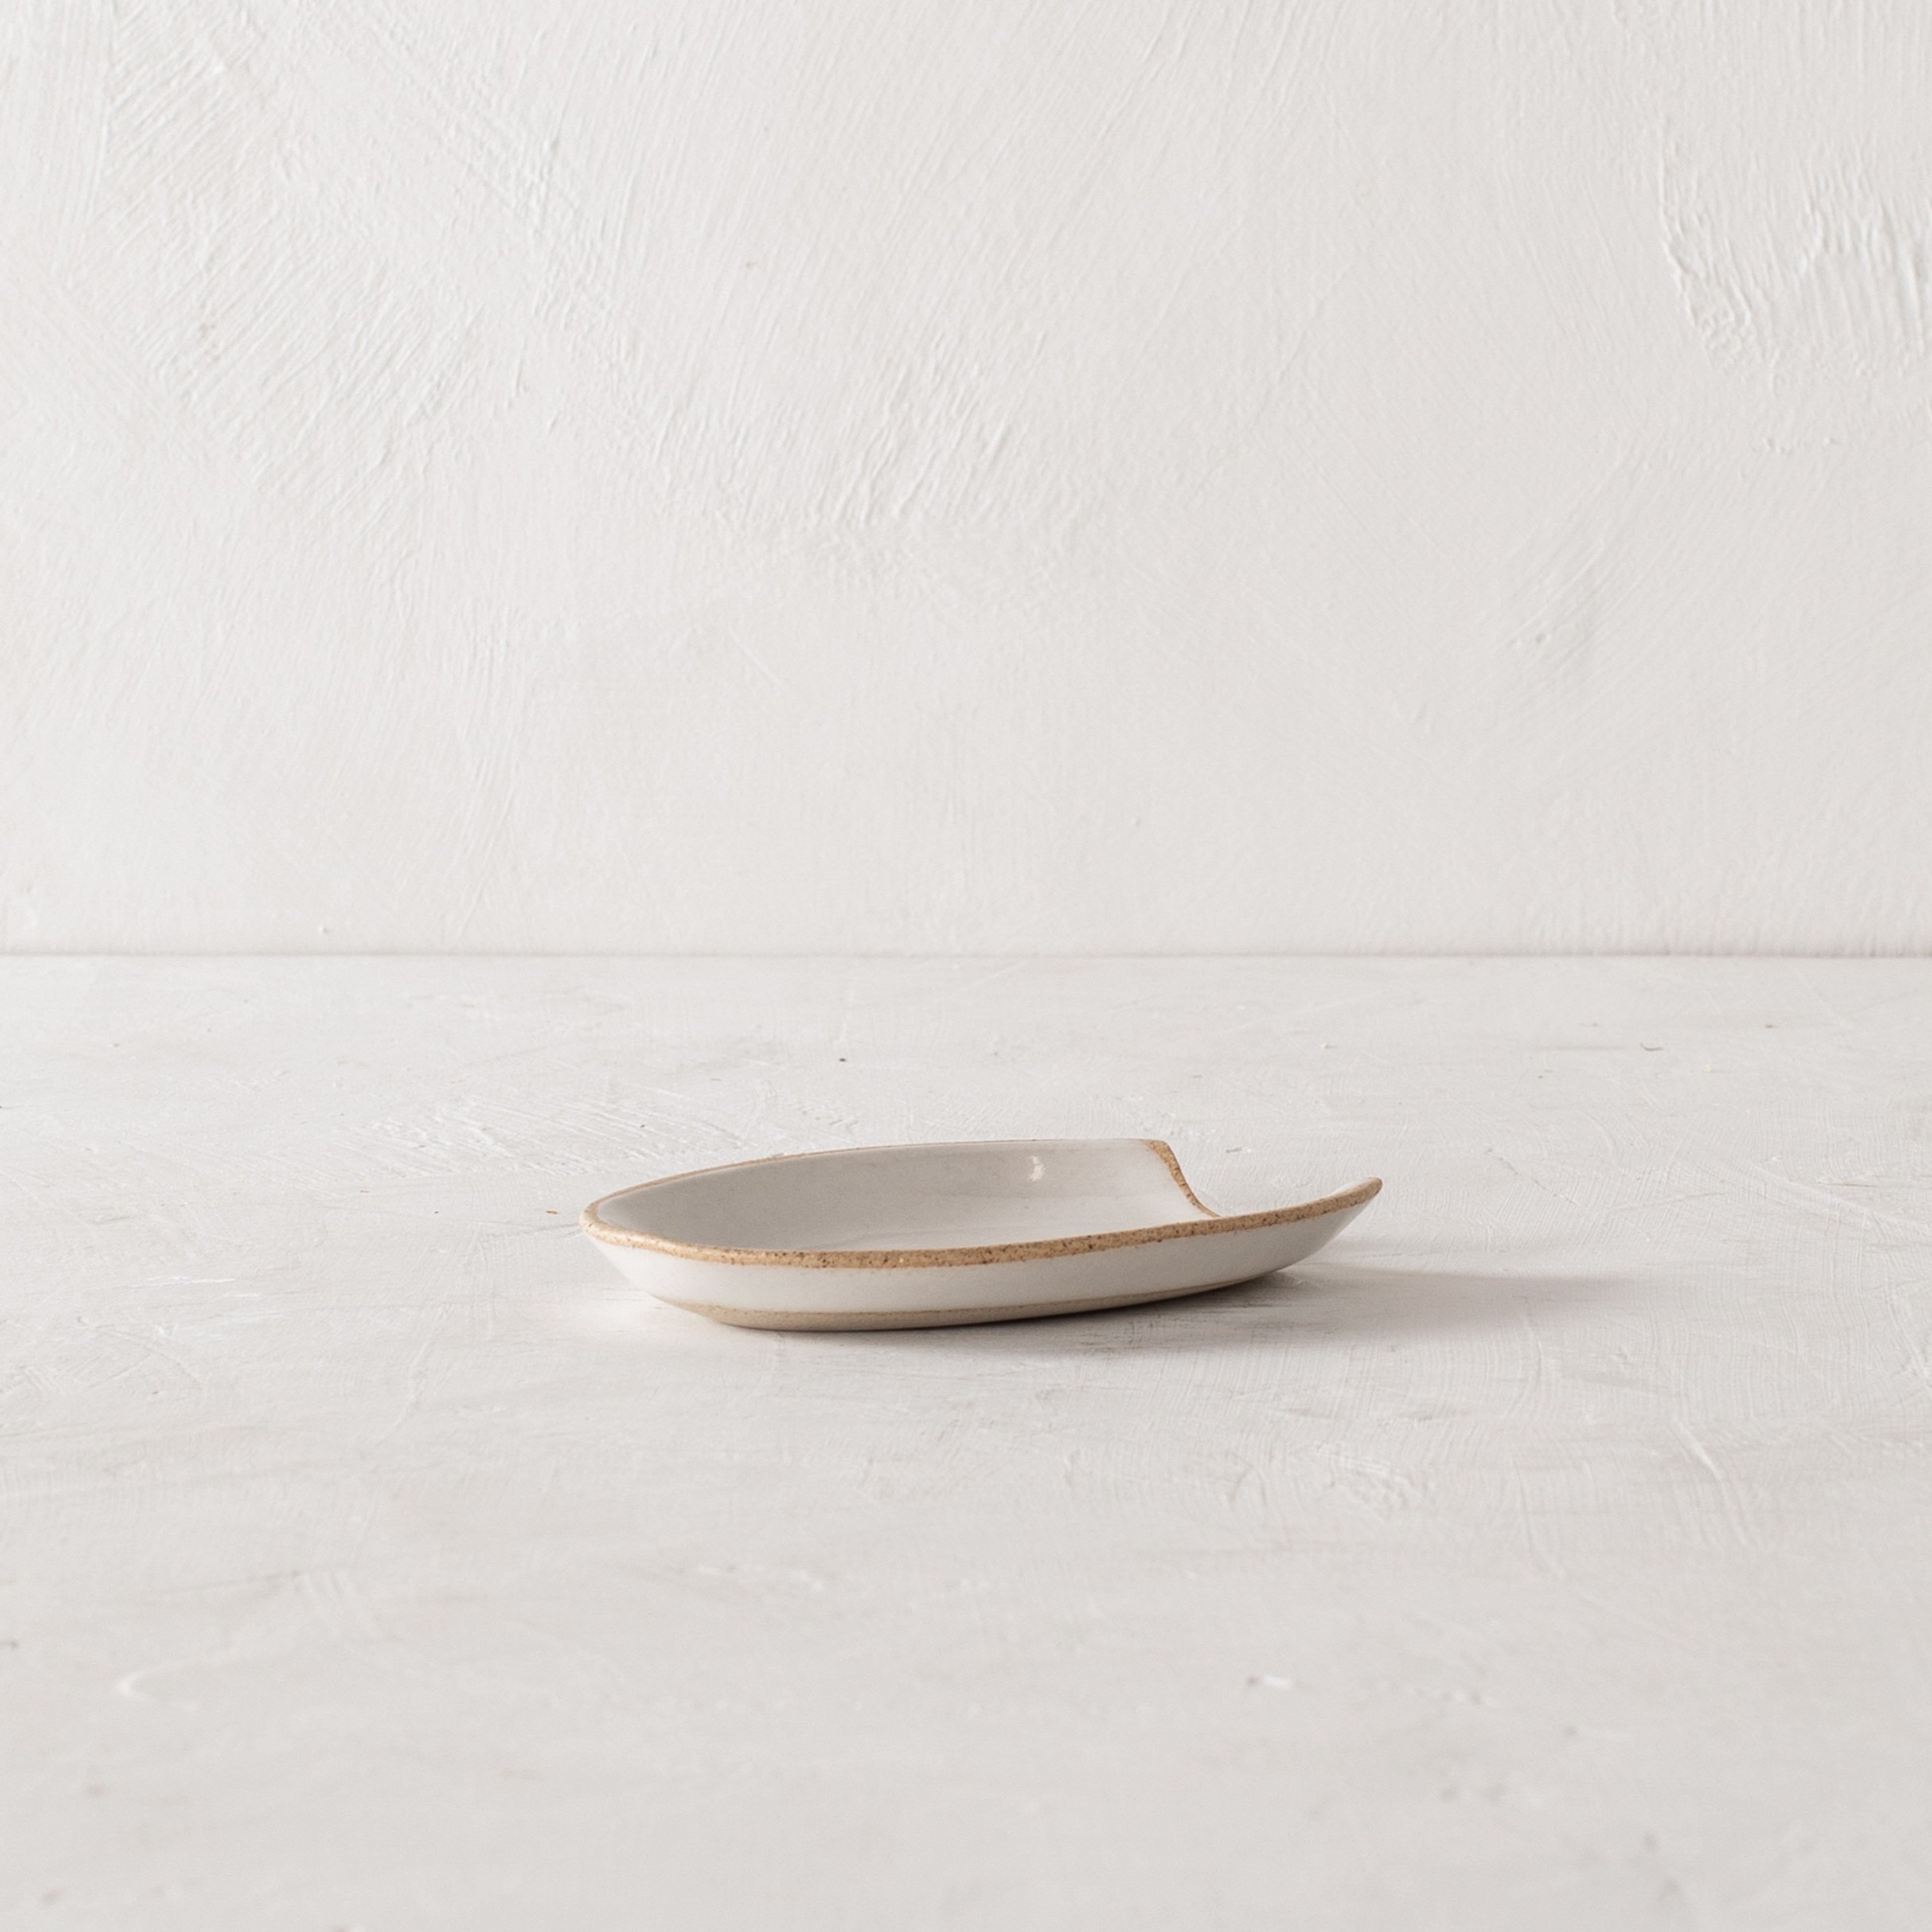 Arch shaped spoon rest with a white glaze over stoneware. The spoon rest's rim is an exposed stoneware. Handmade ceramic spoon rest designed and sold by Convivial Production, Kansas City ceramics.